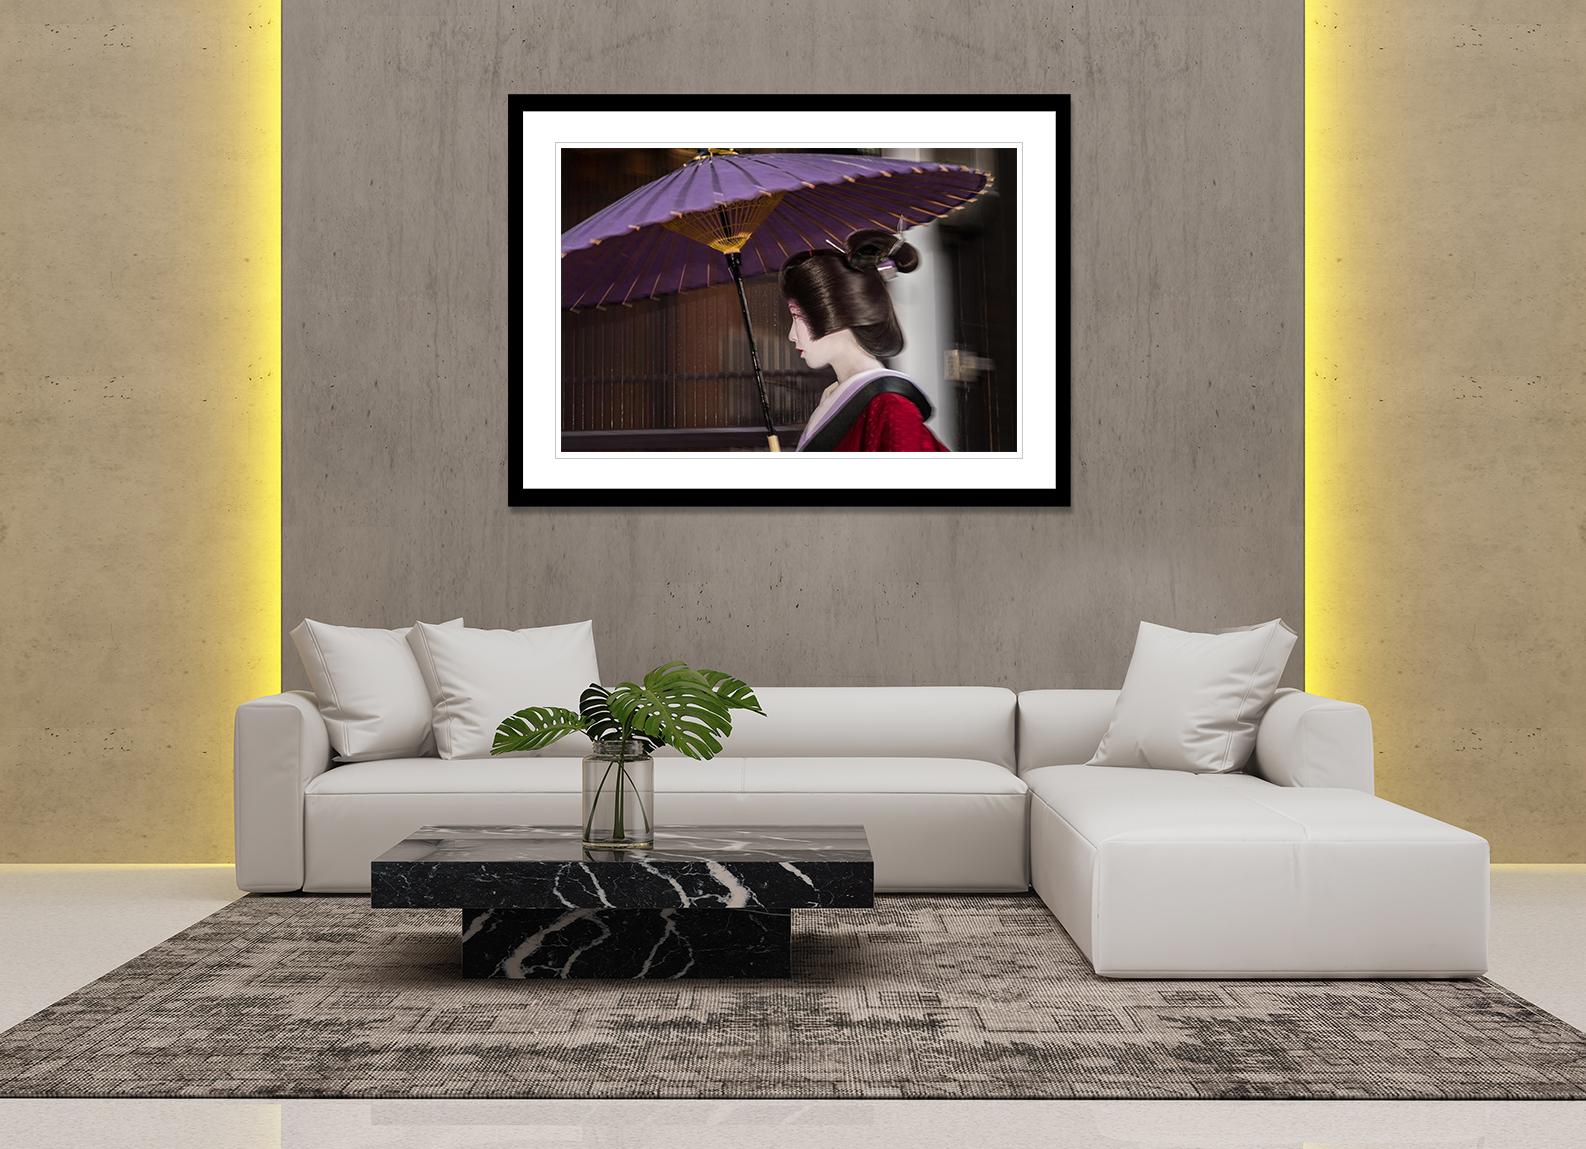 Geisha in the Rain (B) - Limited Editions of 15 - Photograph by Dorte Verner